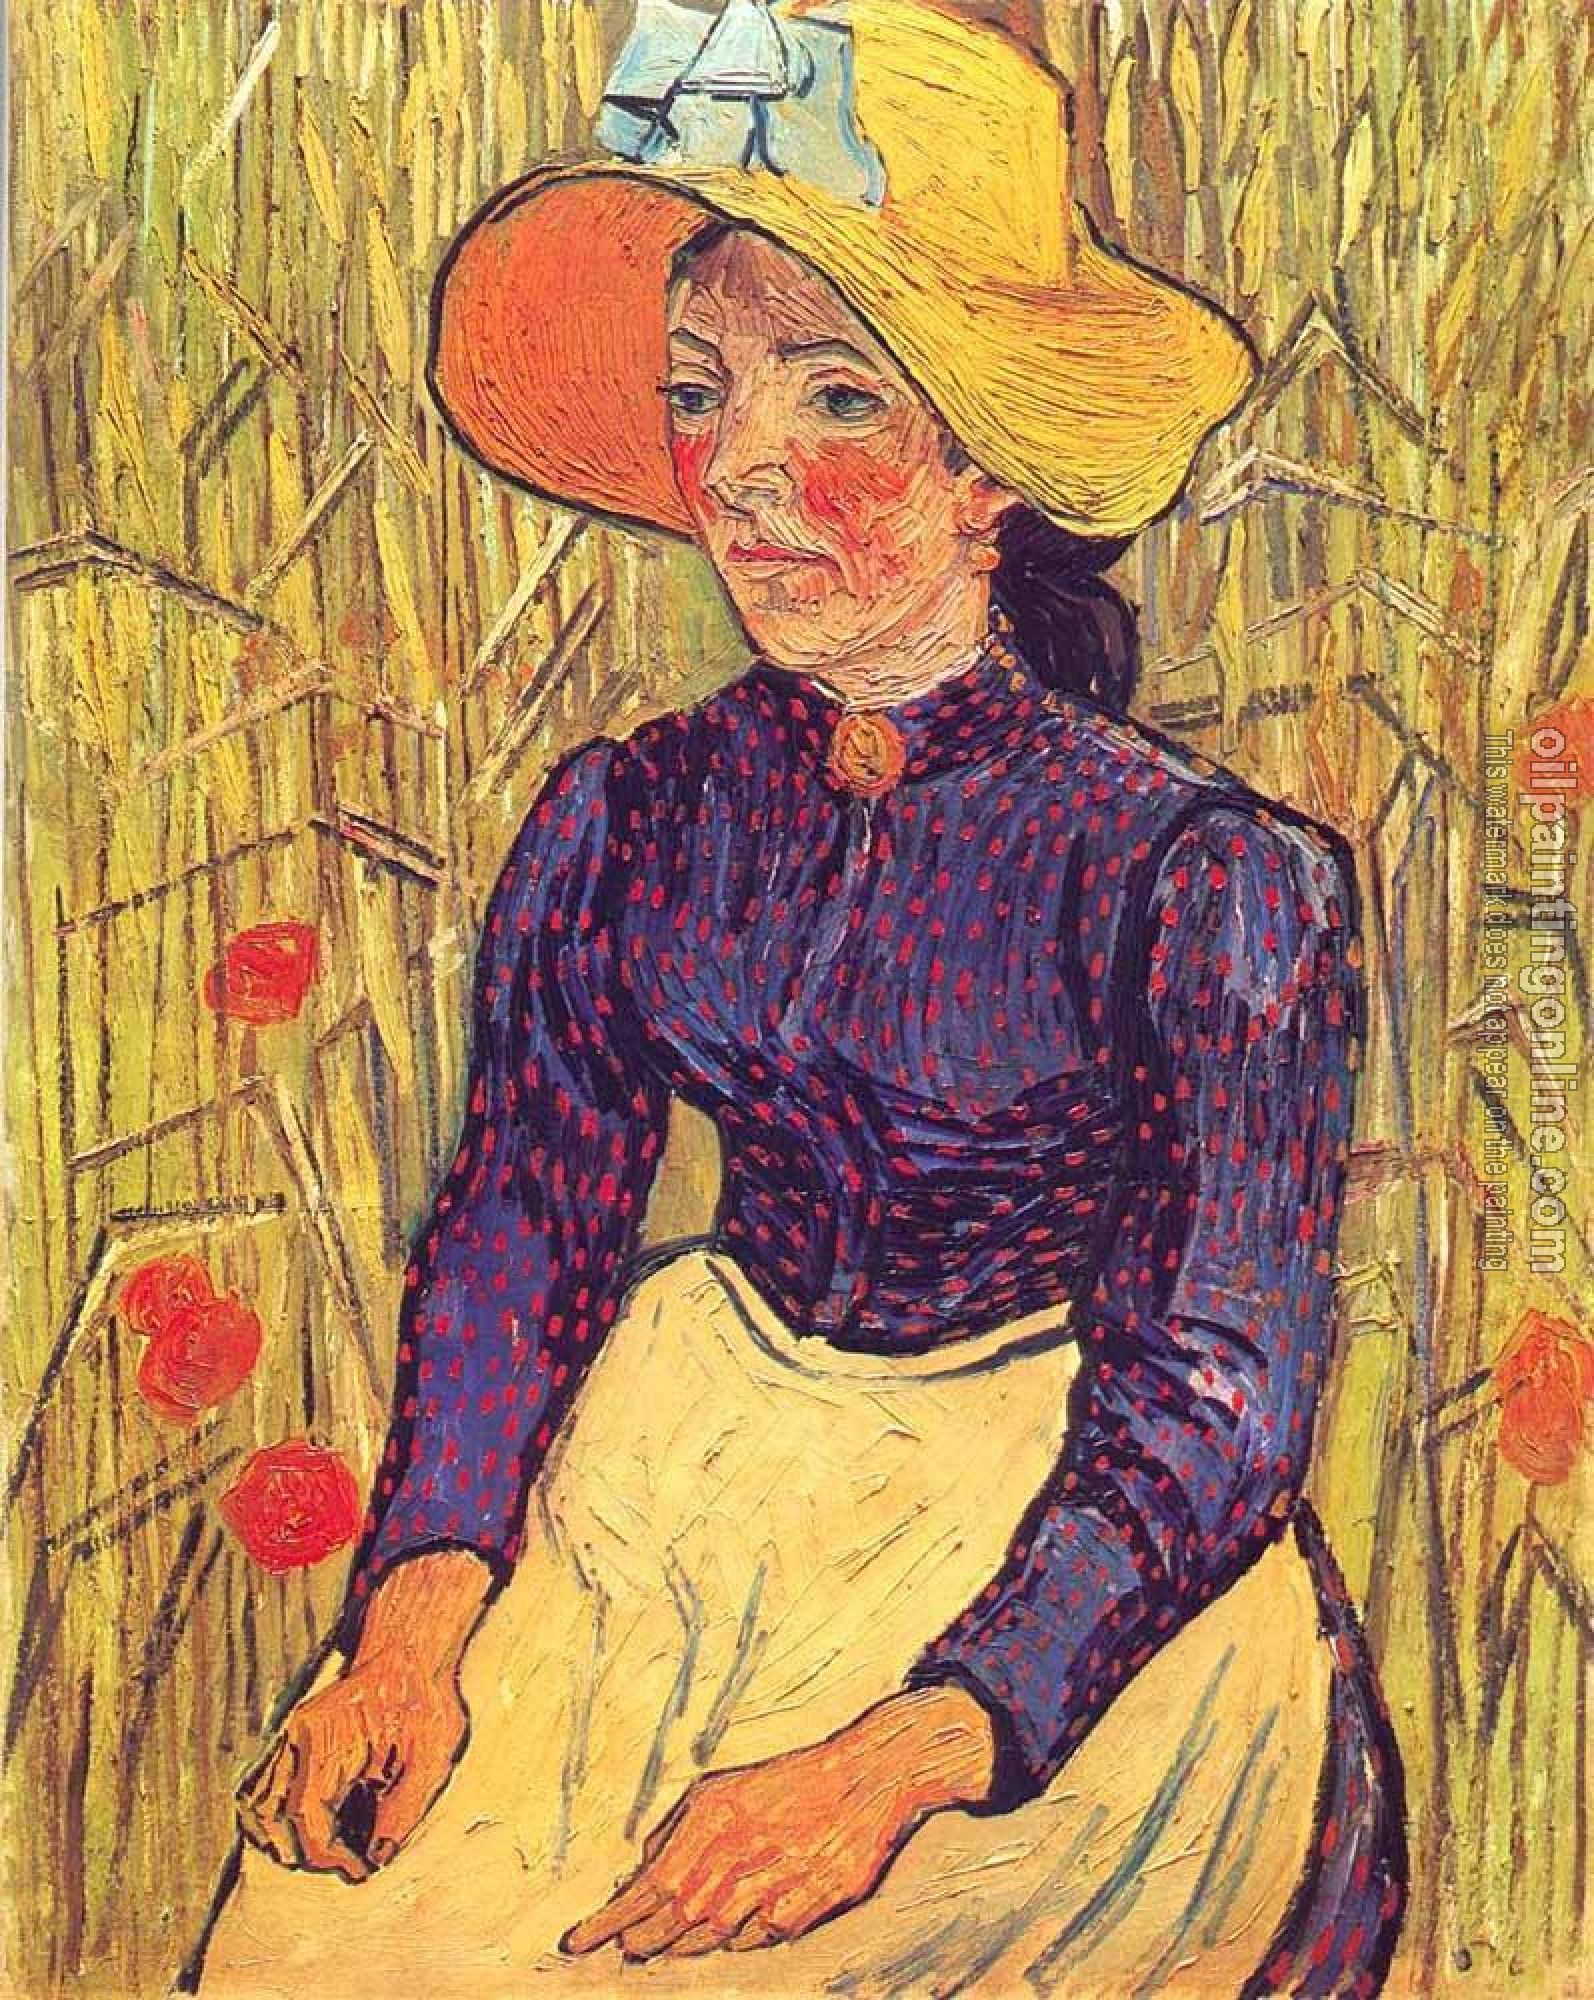 Gogh, Vincent van - Young Peasant Woman with Straw Hat Sitting in the Wheat